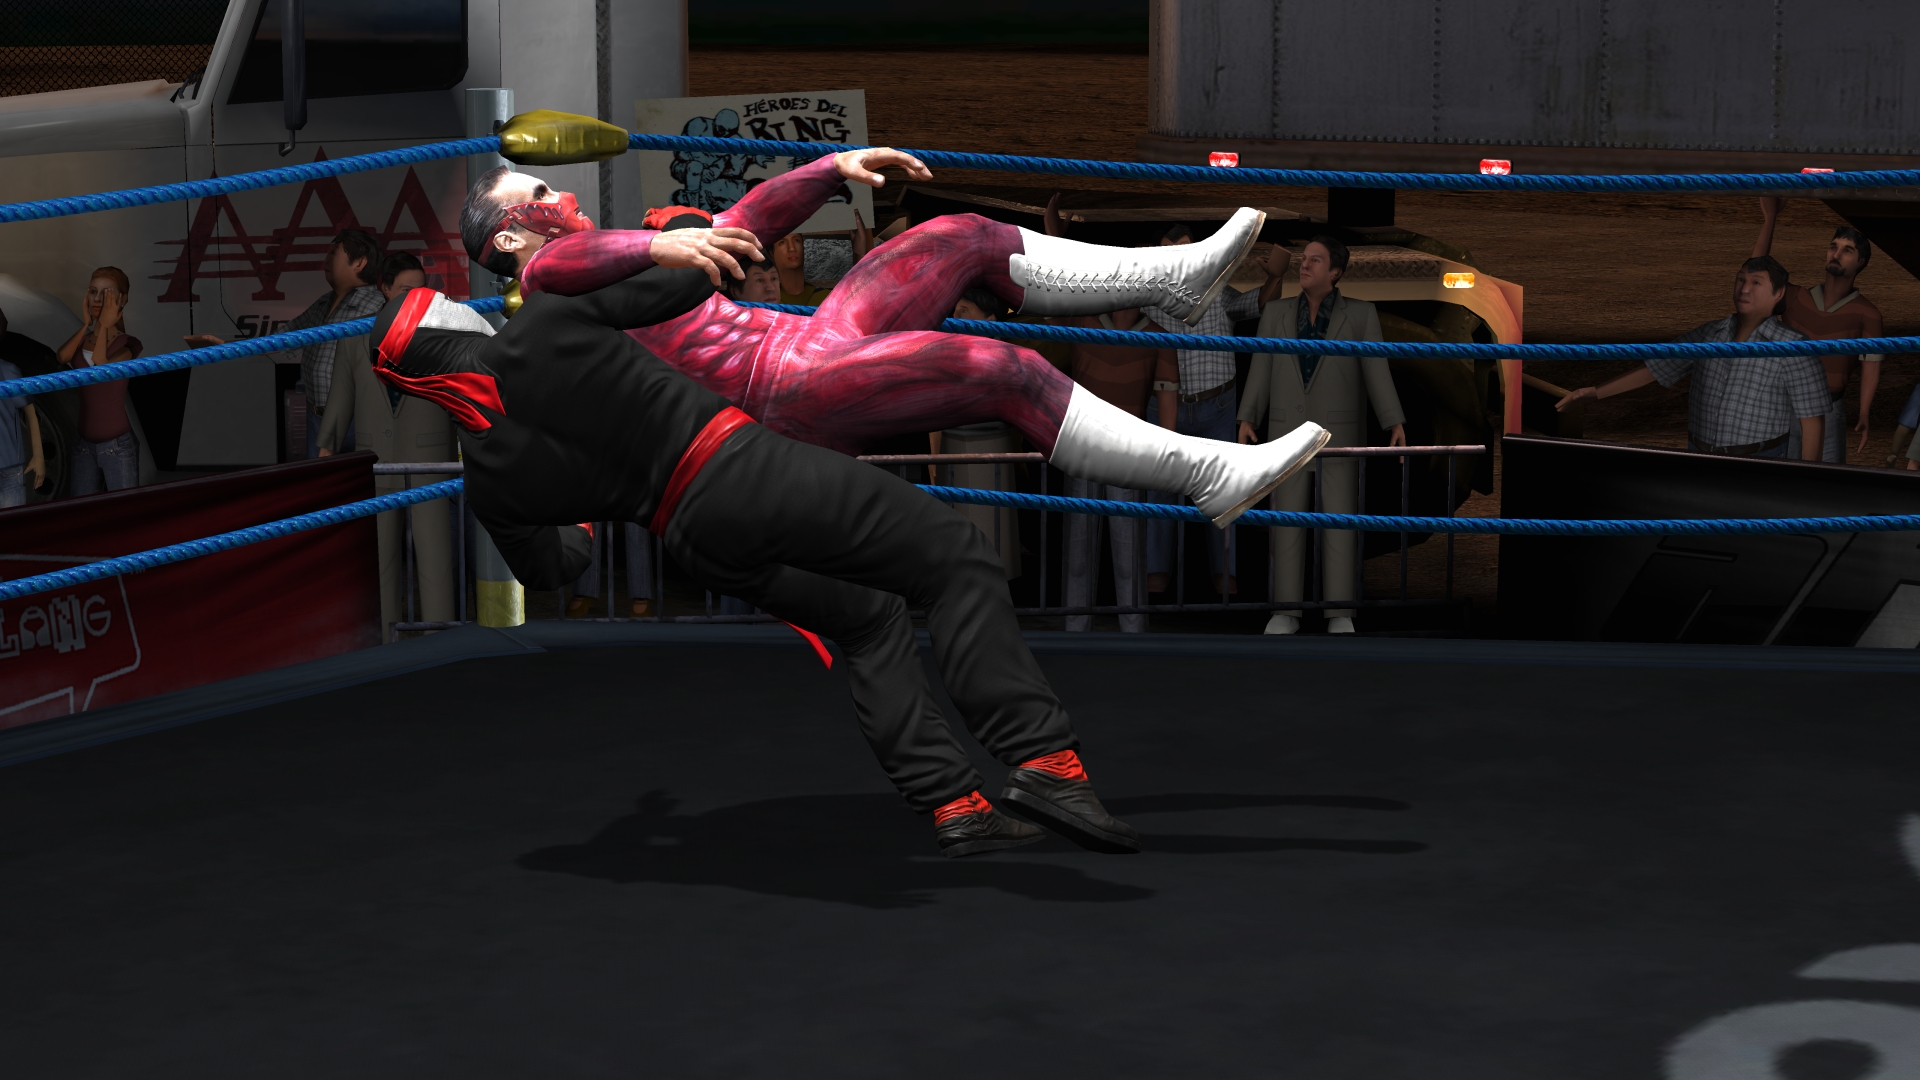 lucha libre aaa video game